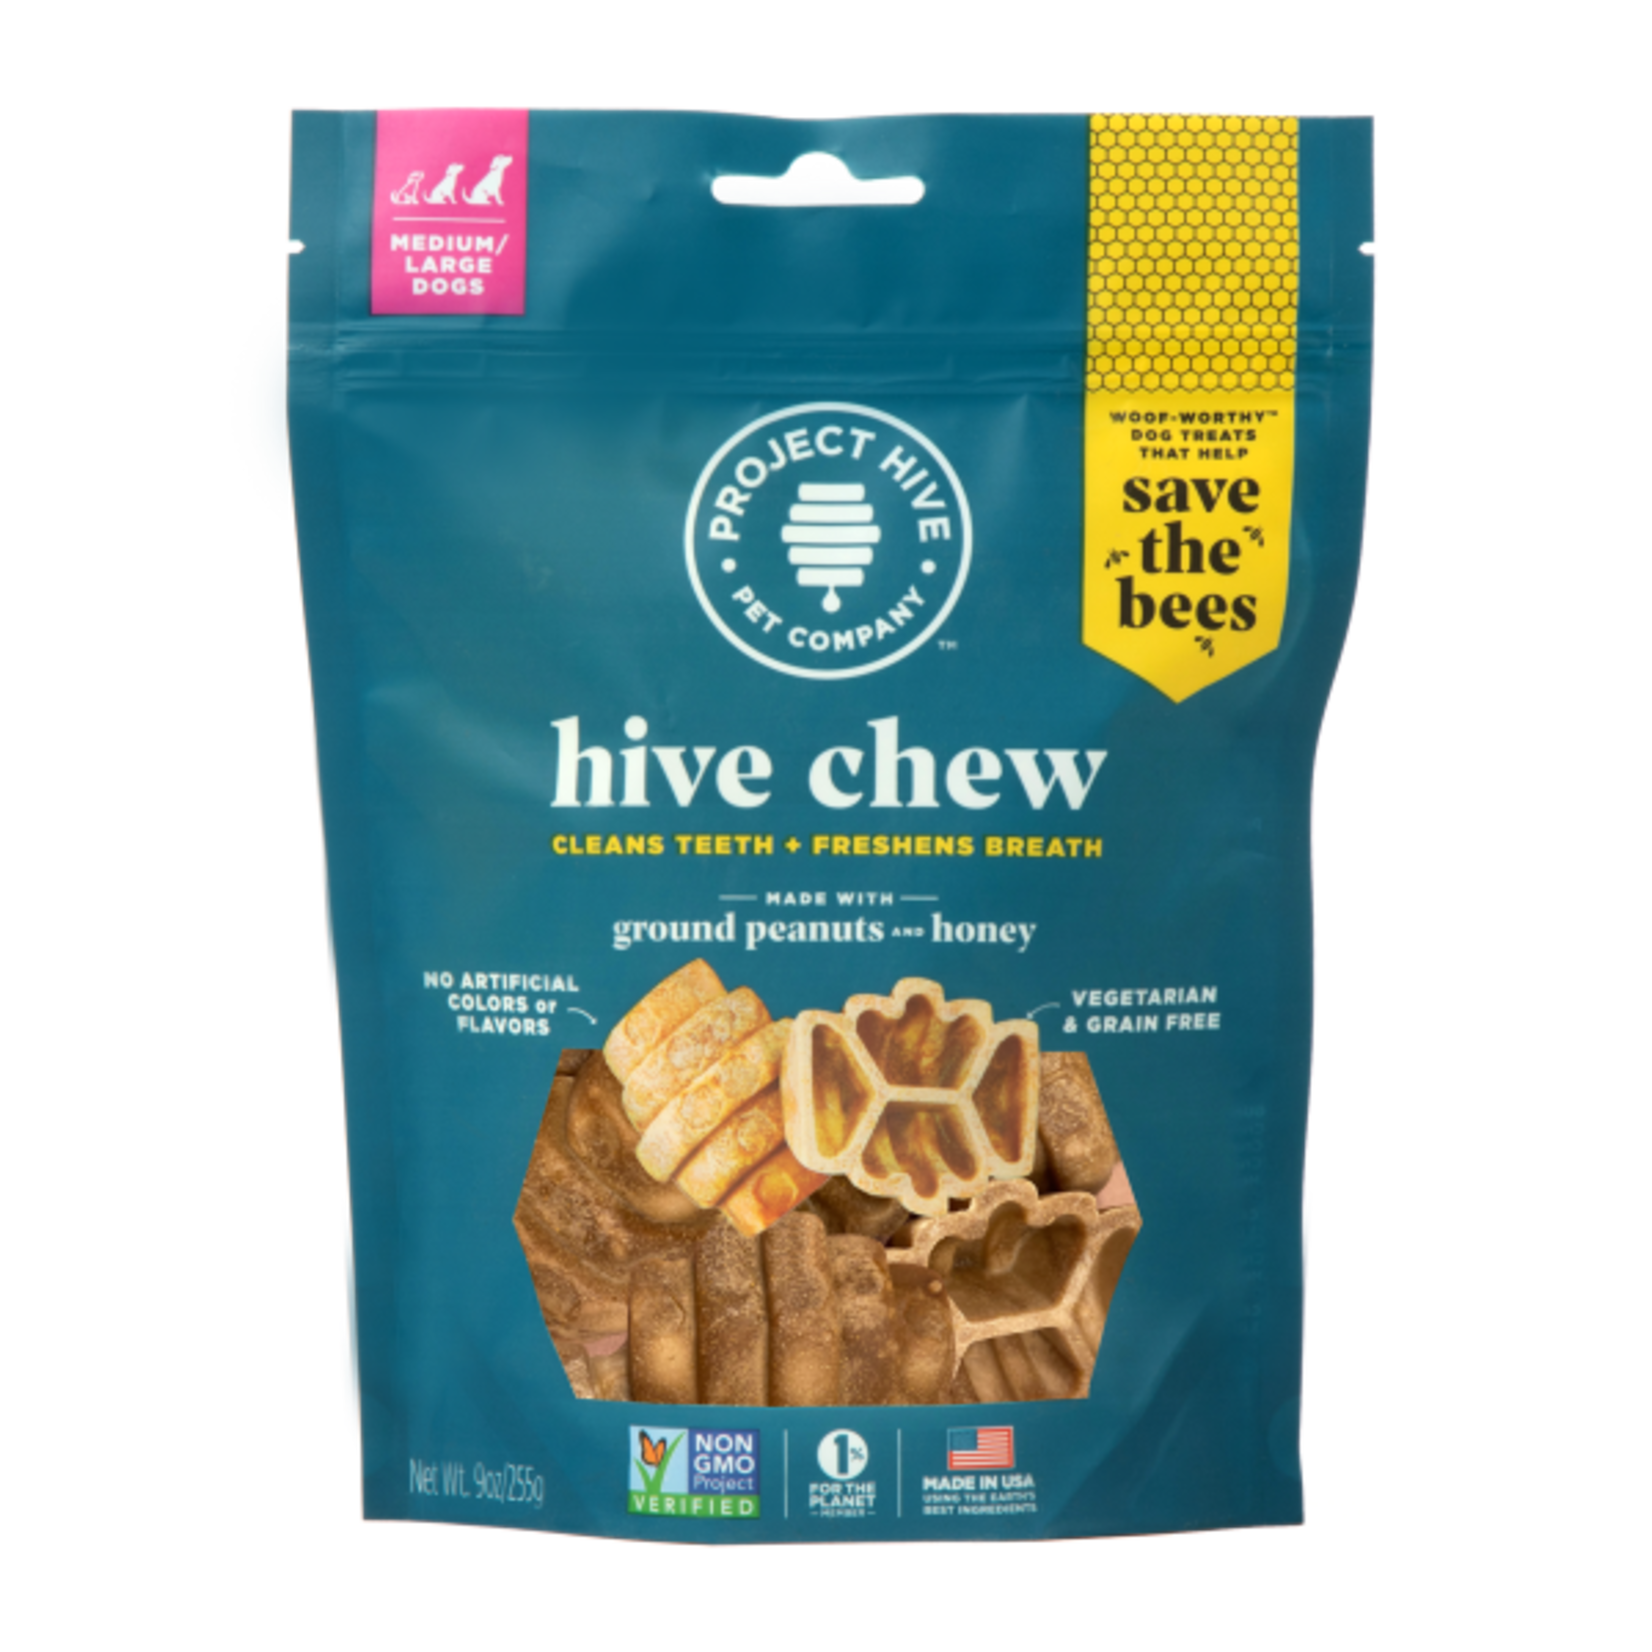 PROJECT HIVE Project Hive Chews Large 9 oz